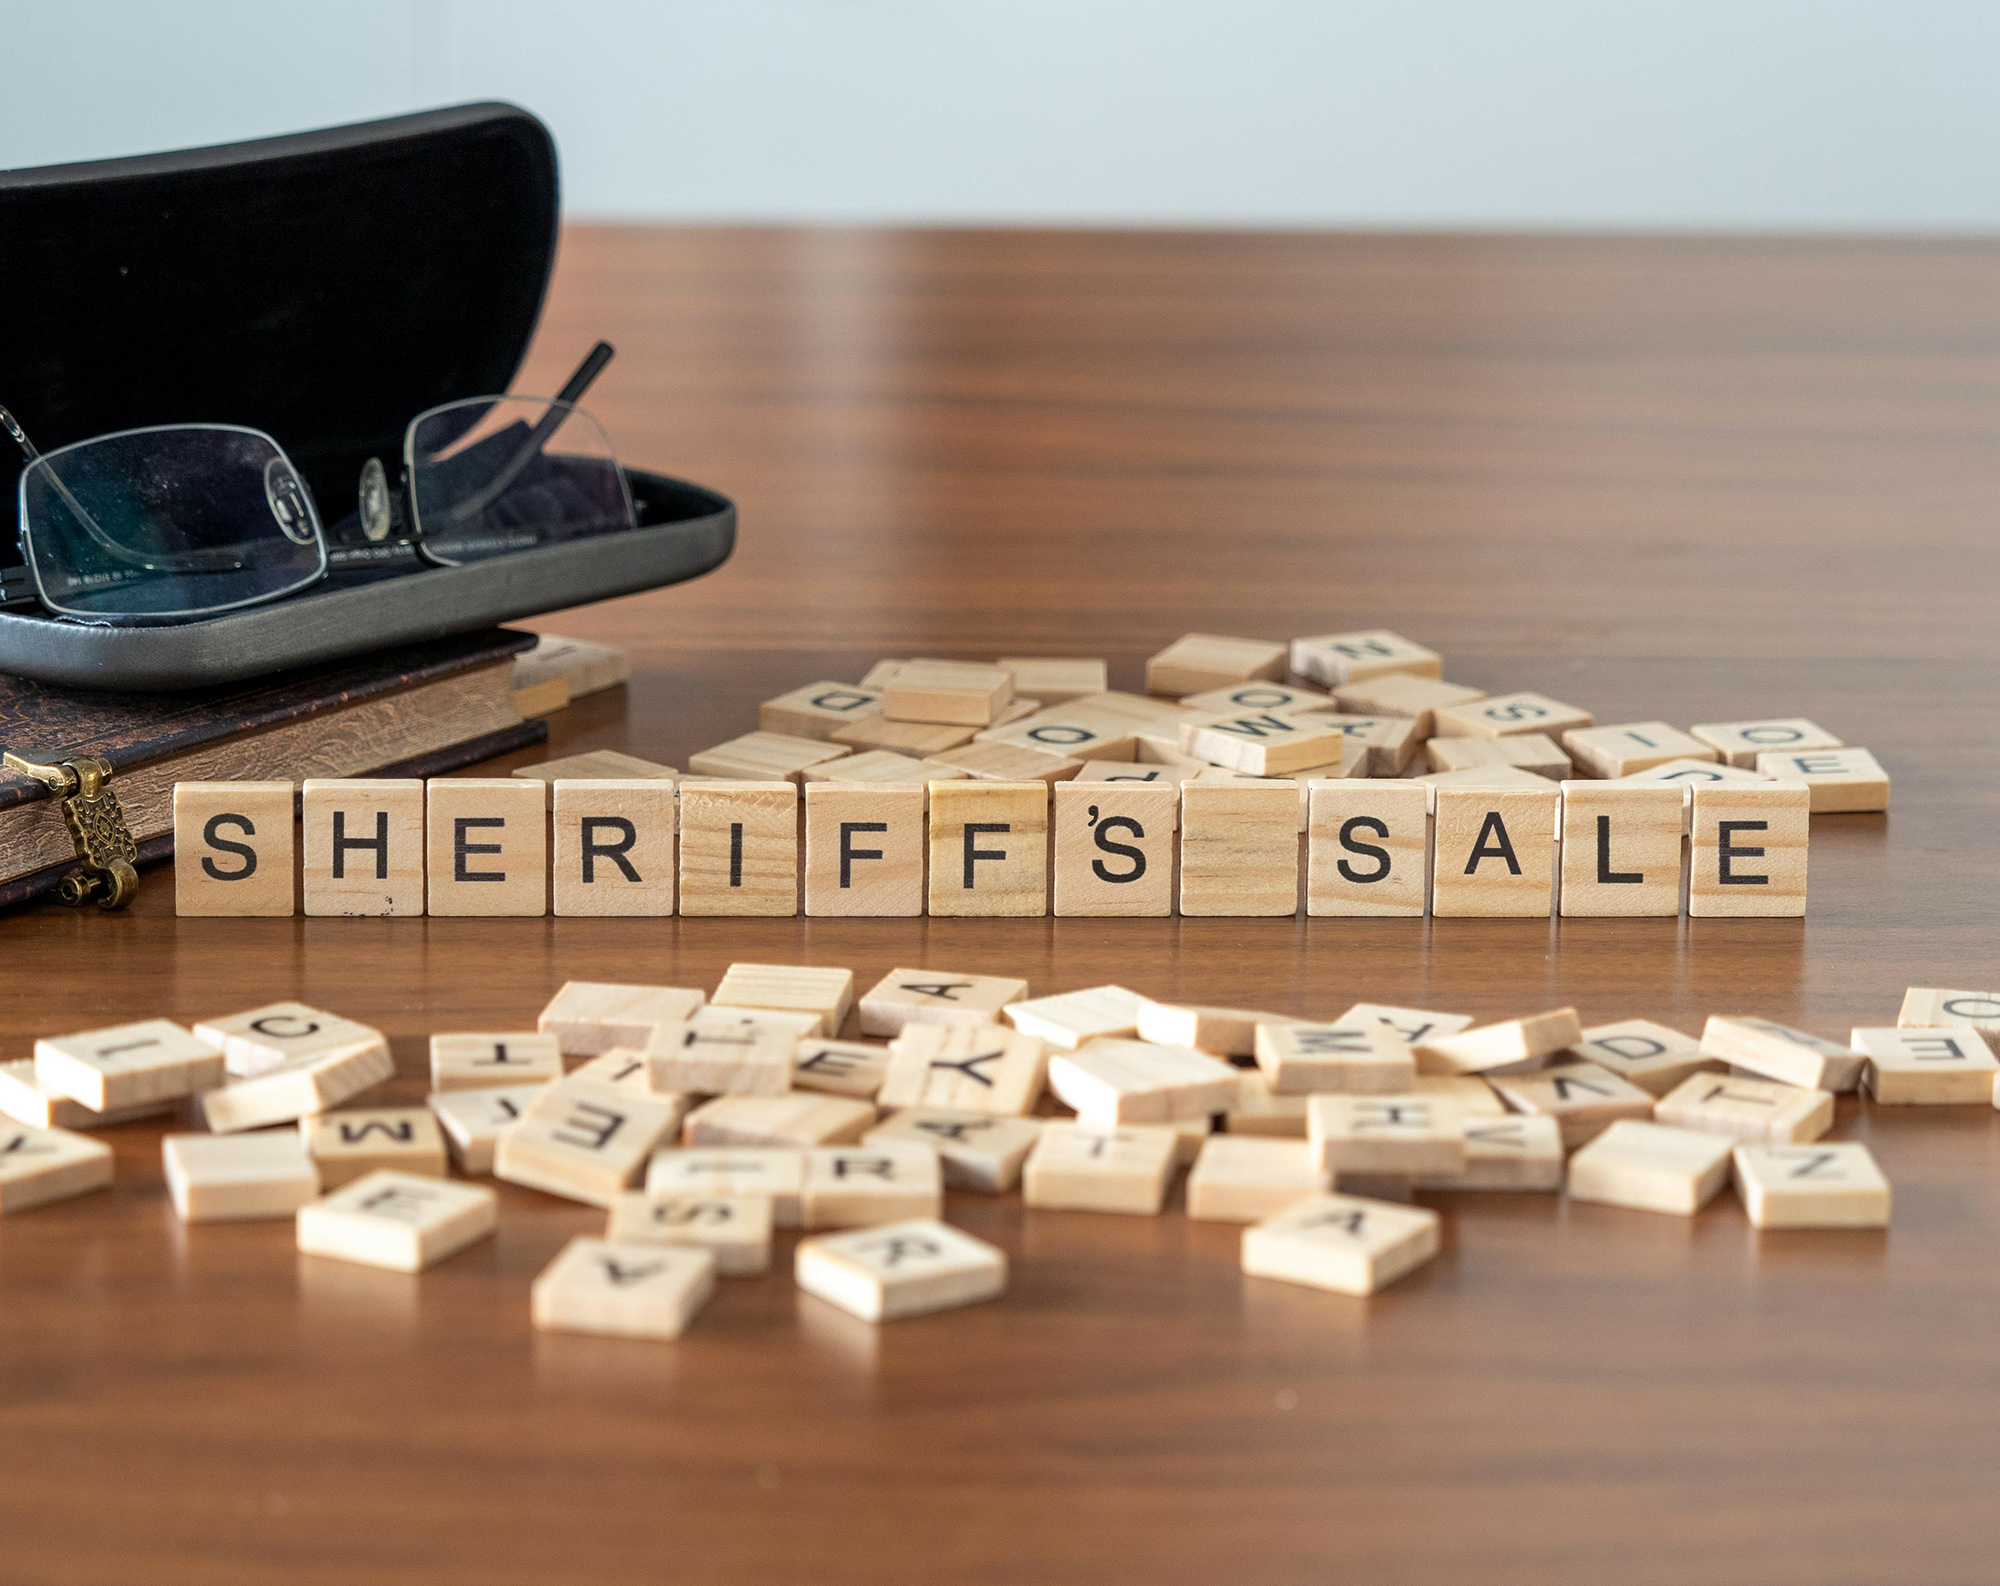 sheriff's sale word or concept represented by wooden letter tiles on a wooden table with glasses and a book